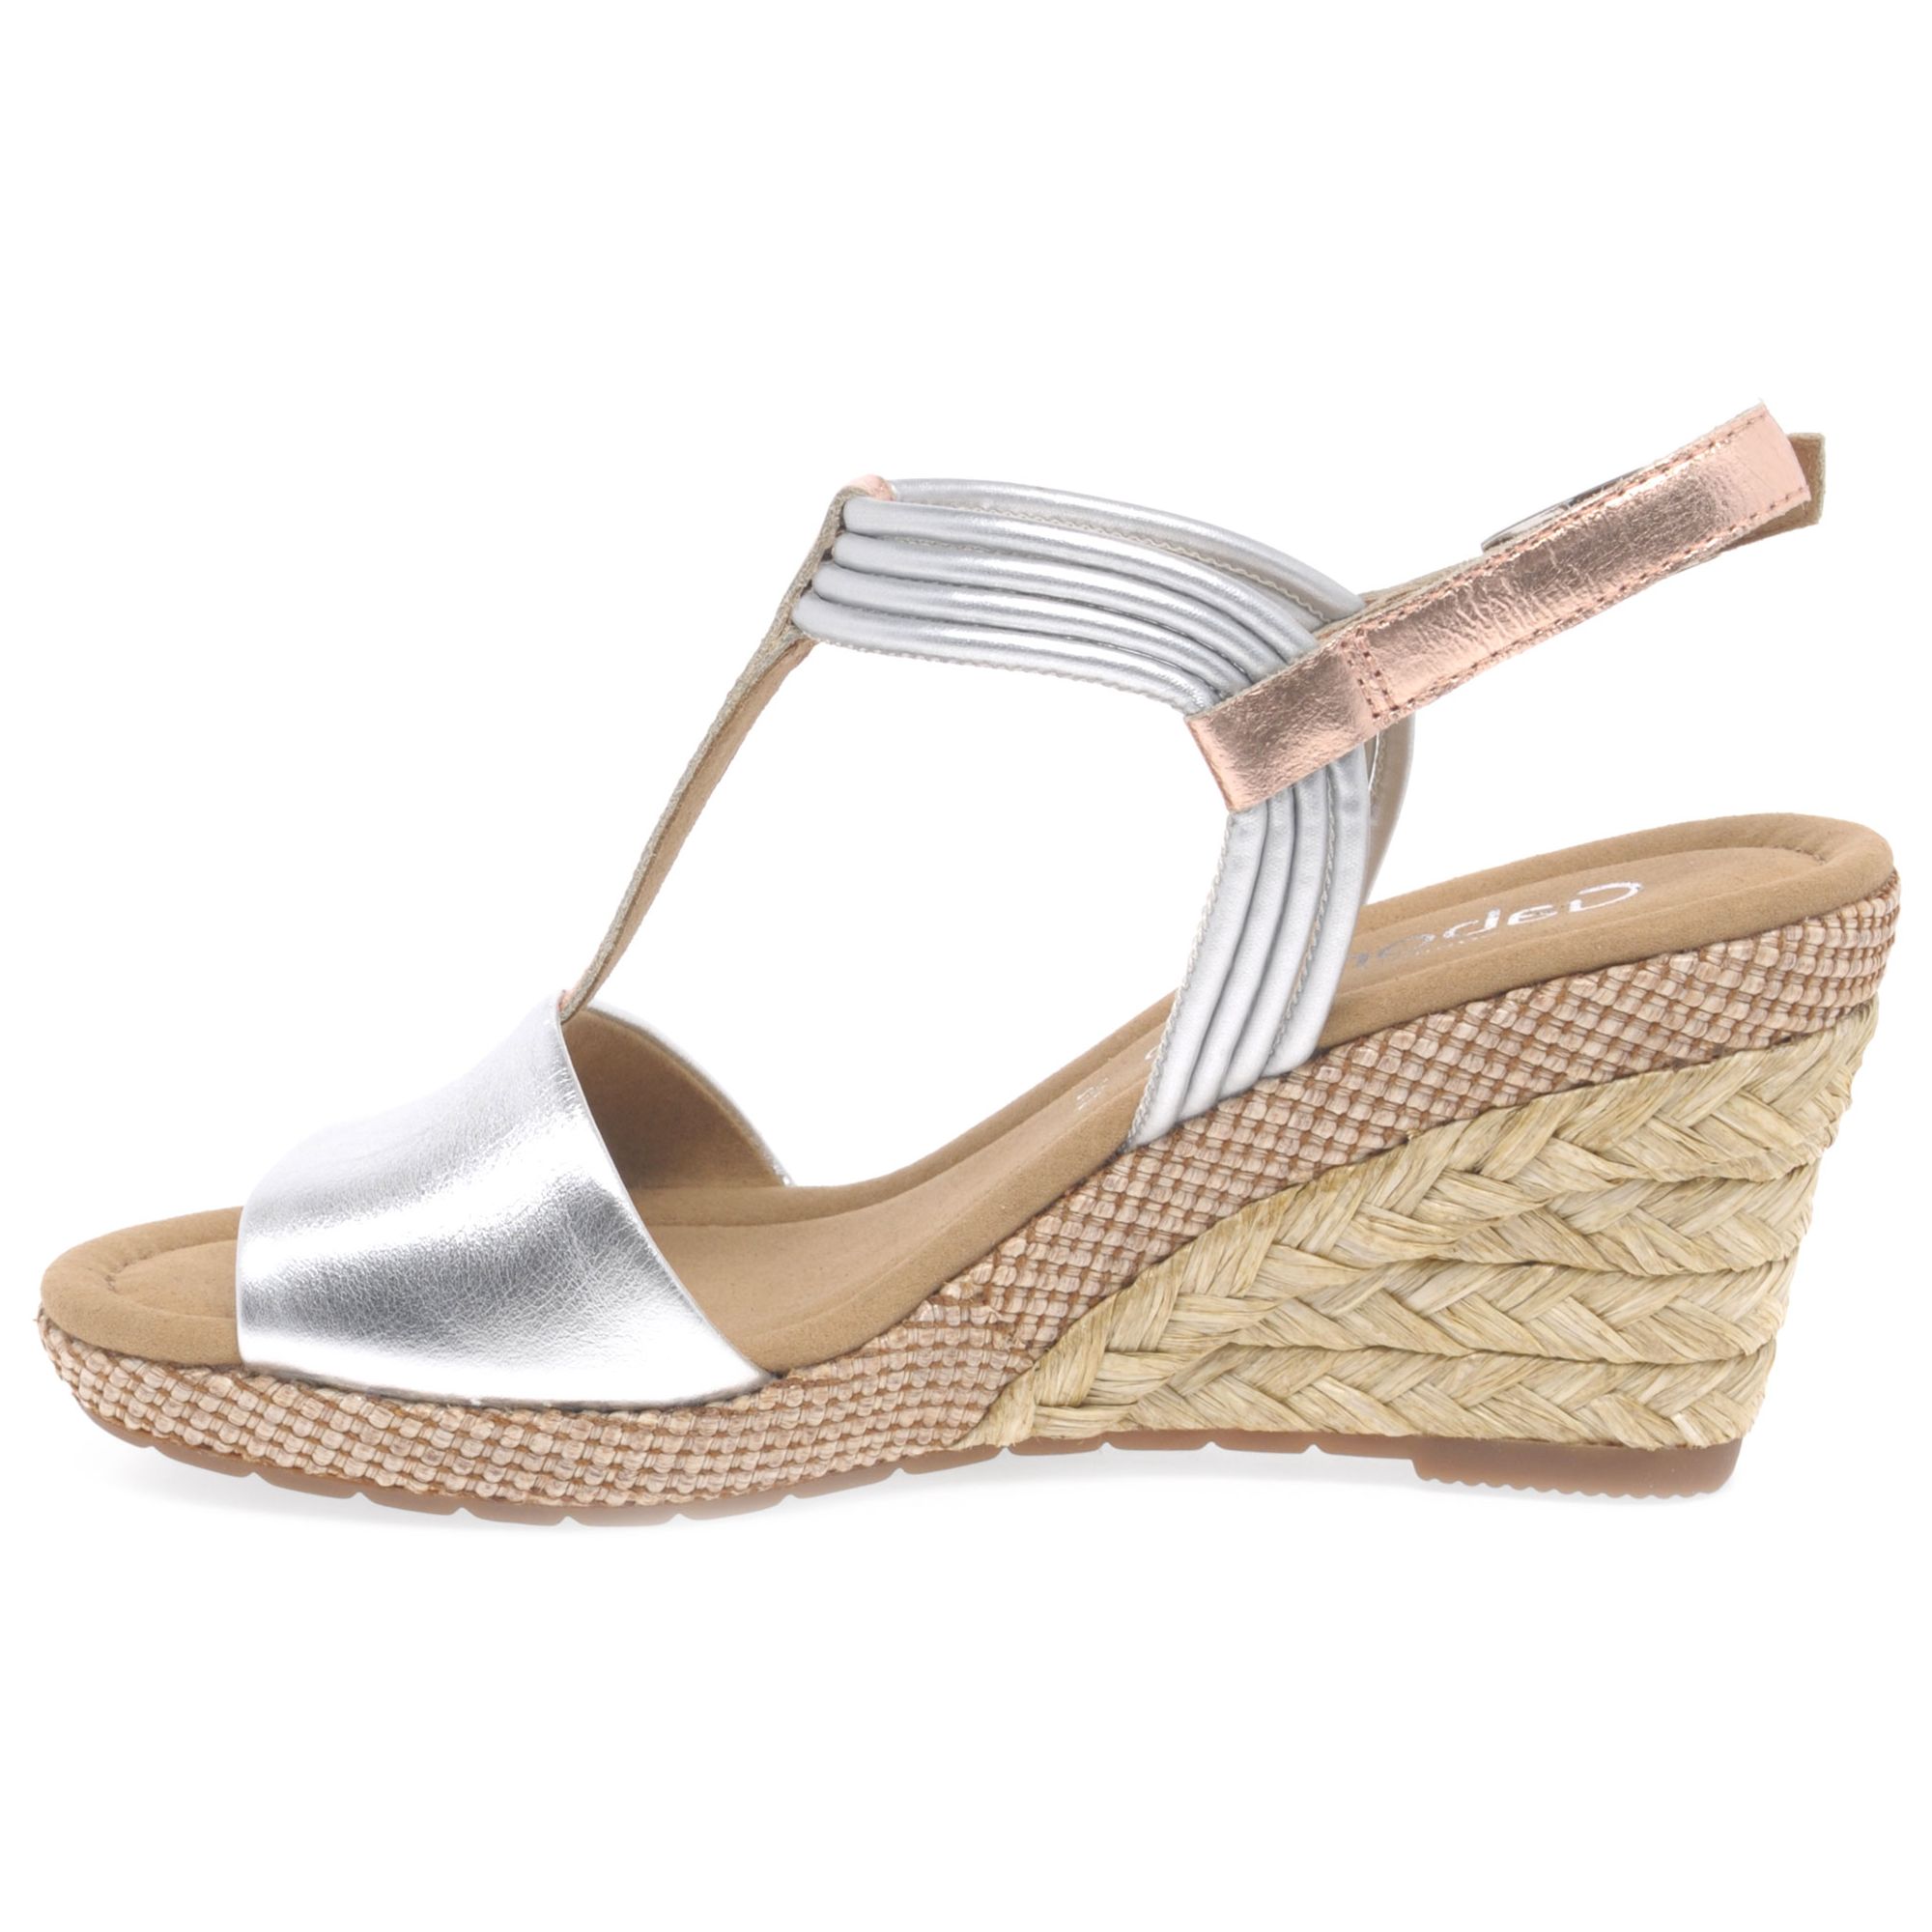 Gabor Jess Wide Fit Wedge Heeled Sandals, Silver Leather